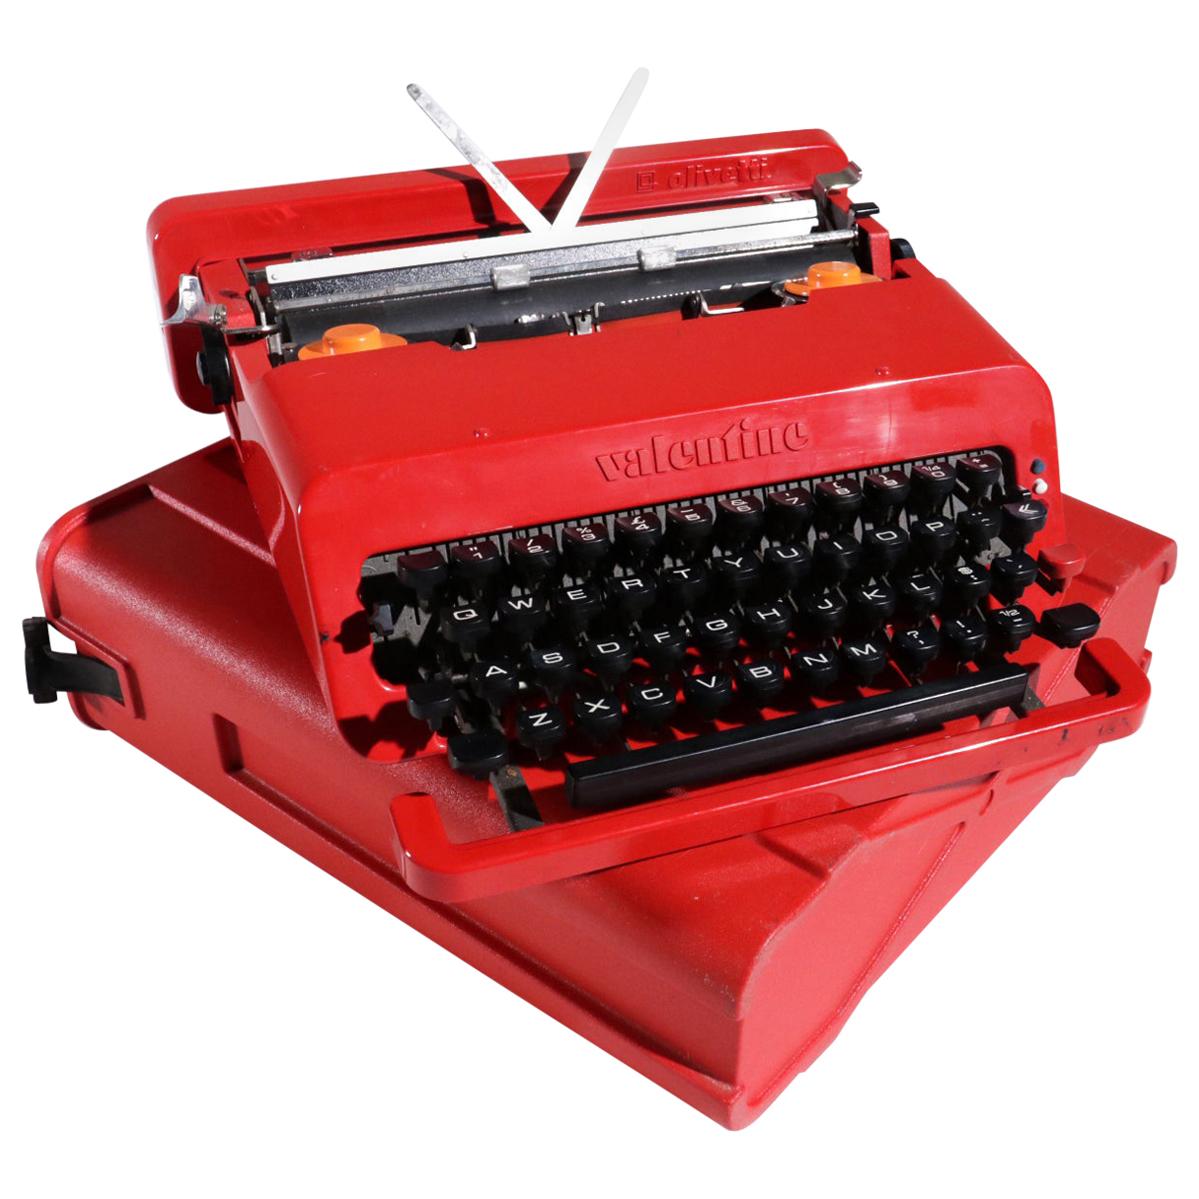 Olivetti Valentine Typewriter Designed by Ettore Sottsass & Perry King